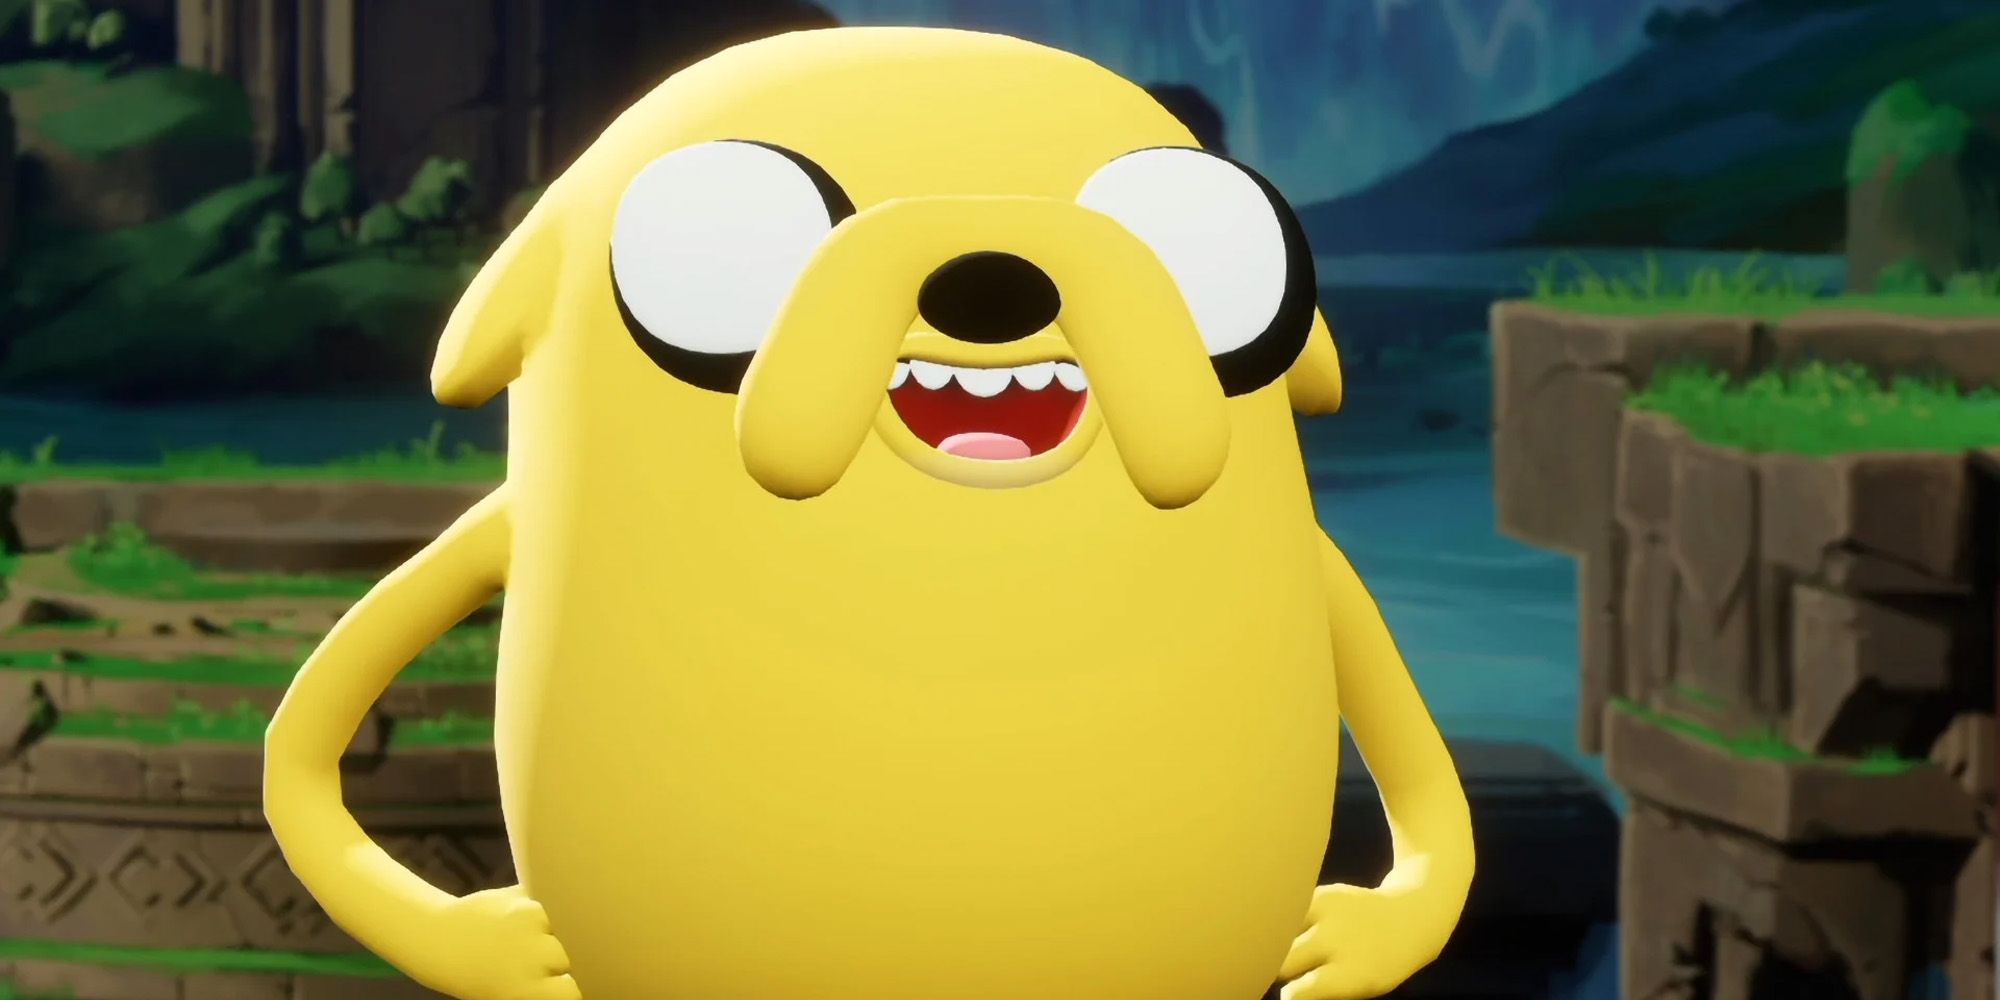 Jake the dog in MultiVersus